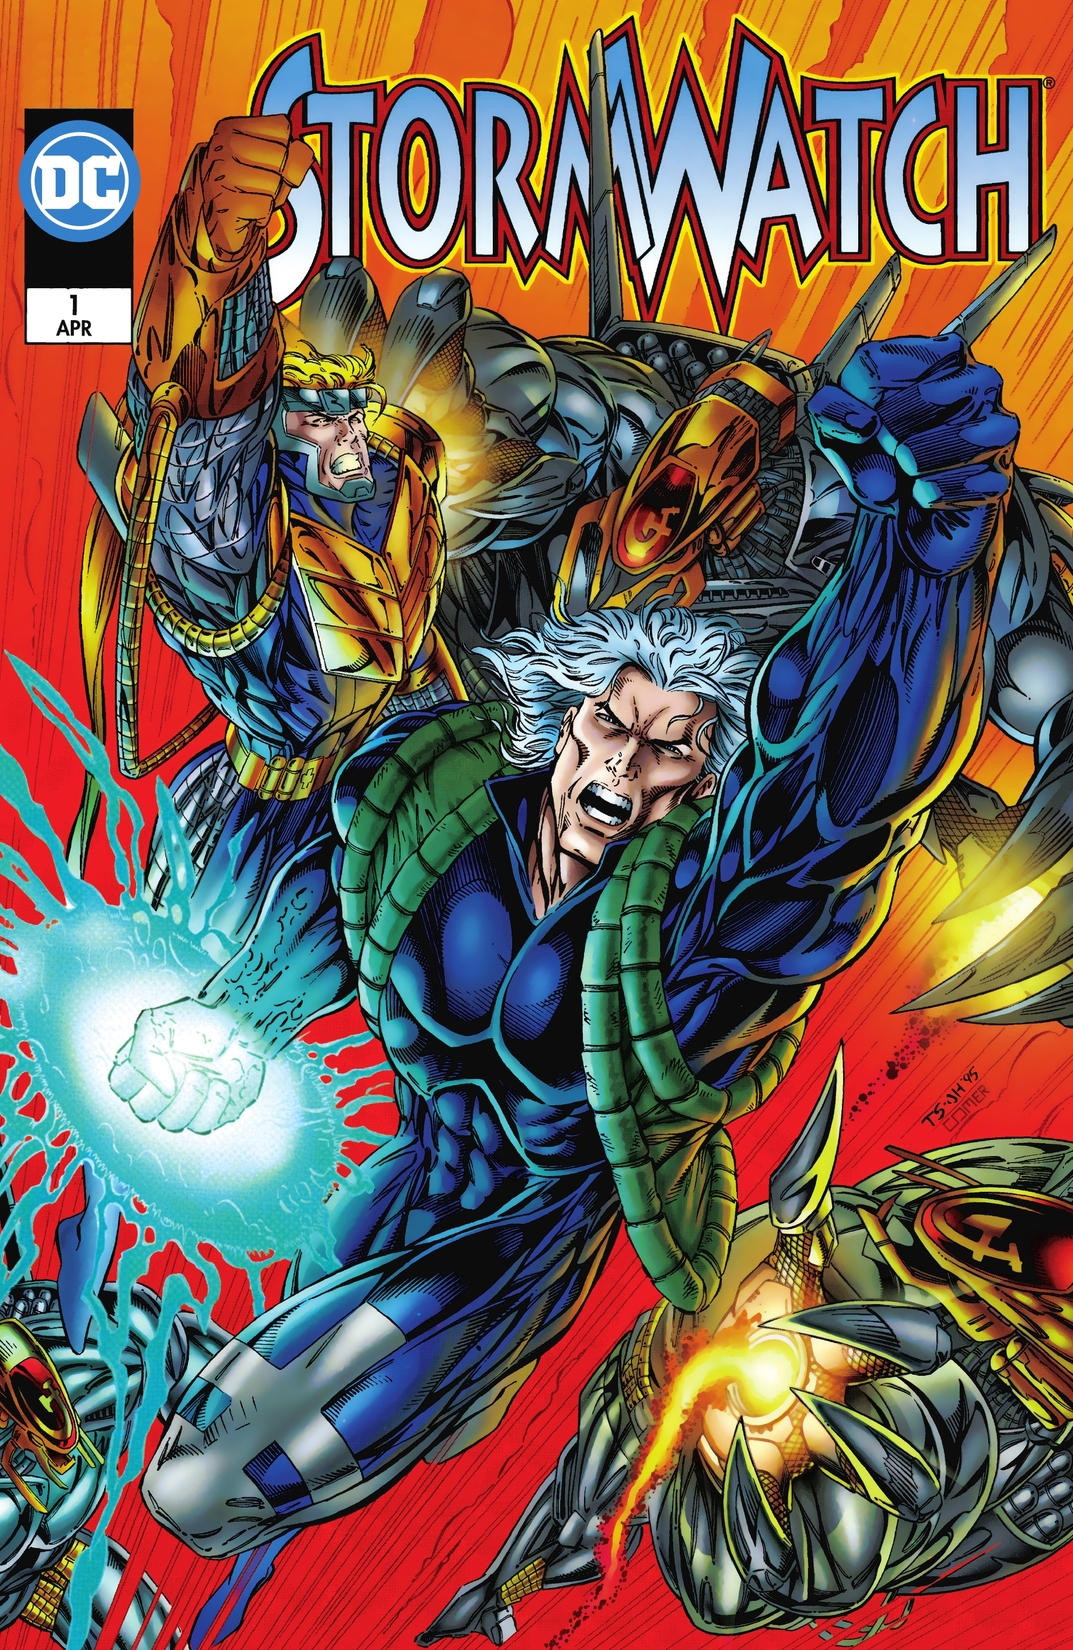 Stormwatch (1993-1997) #21 preview images